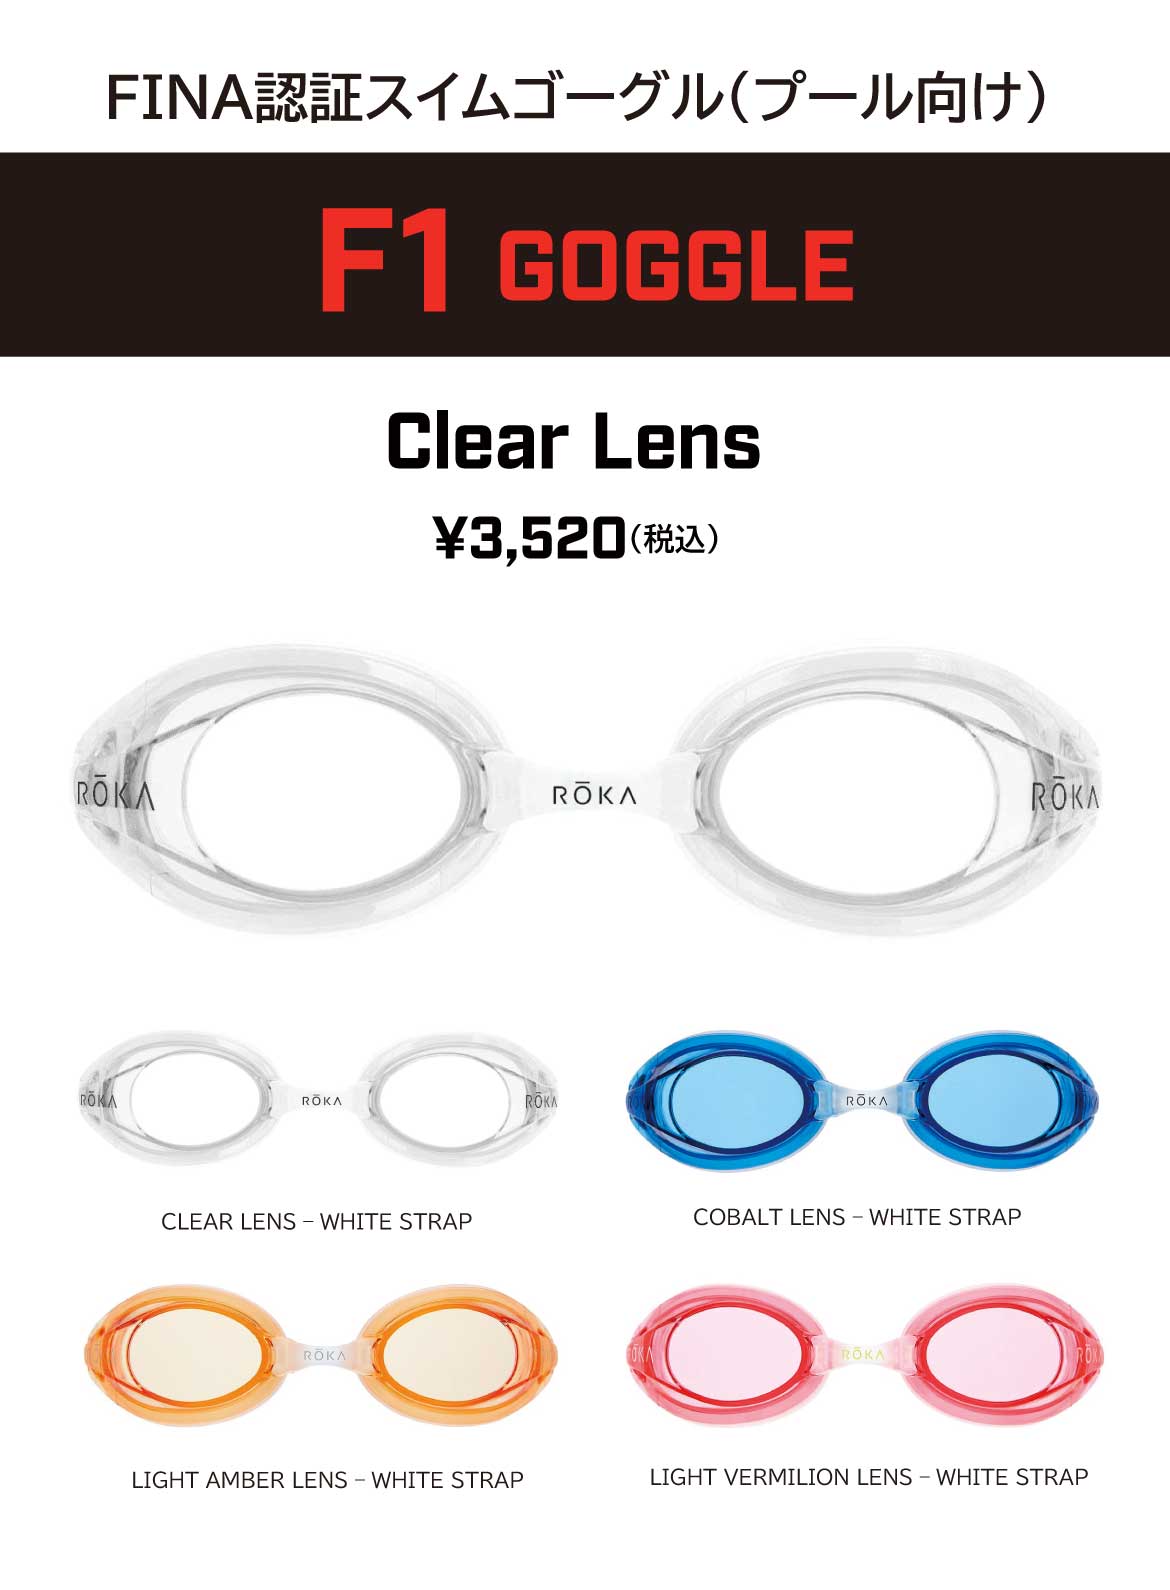 F1 GOGGLE Clear Lens